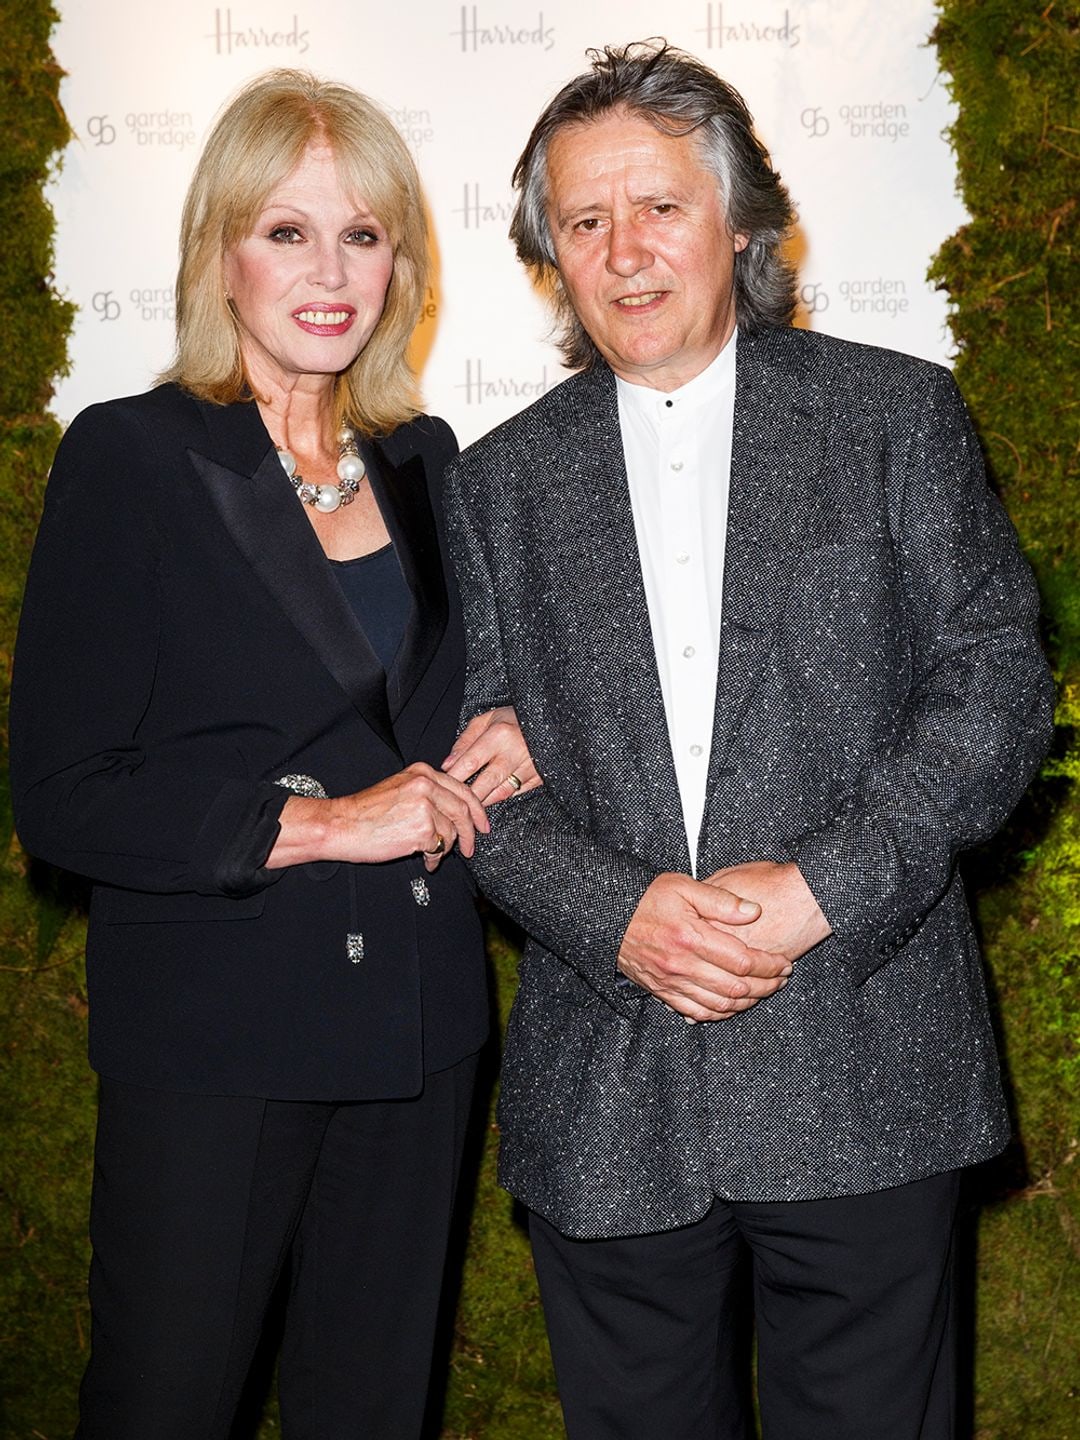 Joanna Lumley and her husband Stephen Barlow at a Harrods event